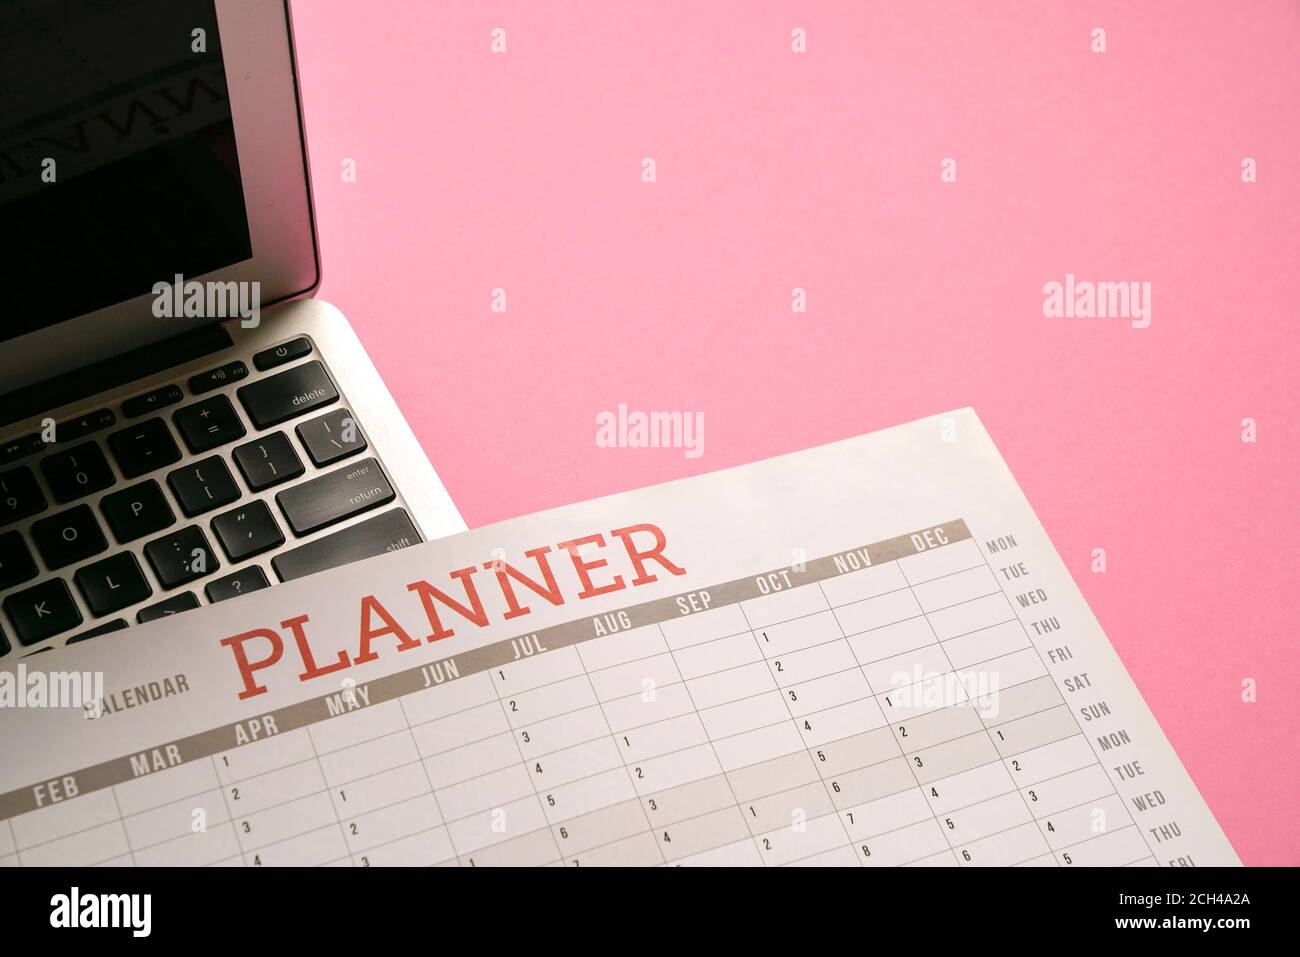 Calendar planner and computer laptop on top of pink table top. Flat lay. Stock Photo